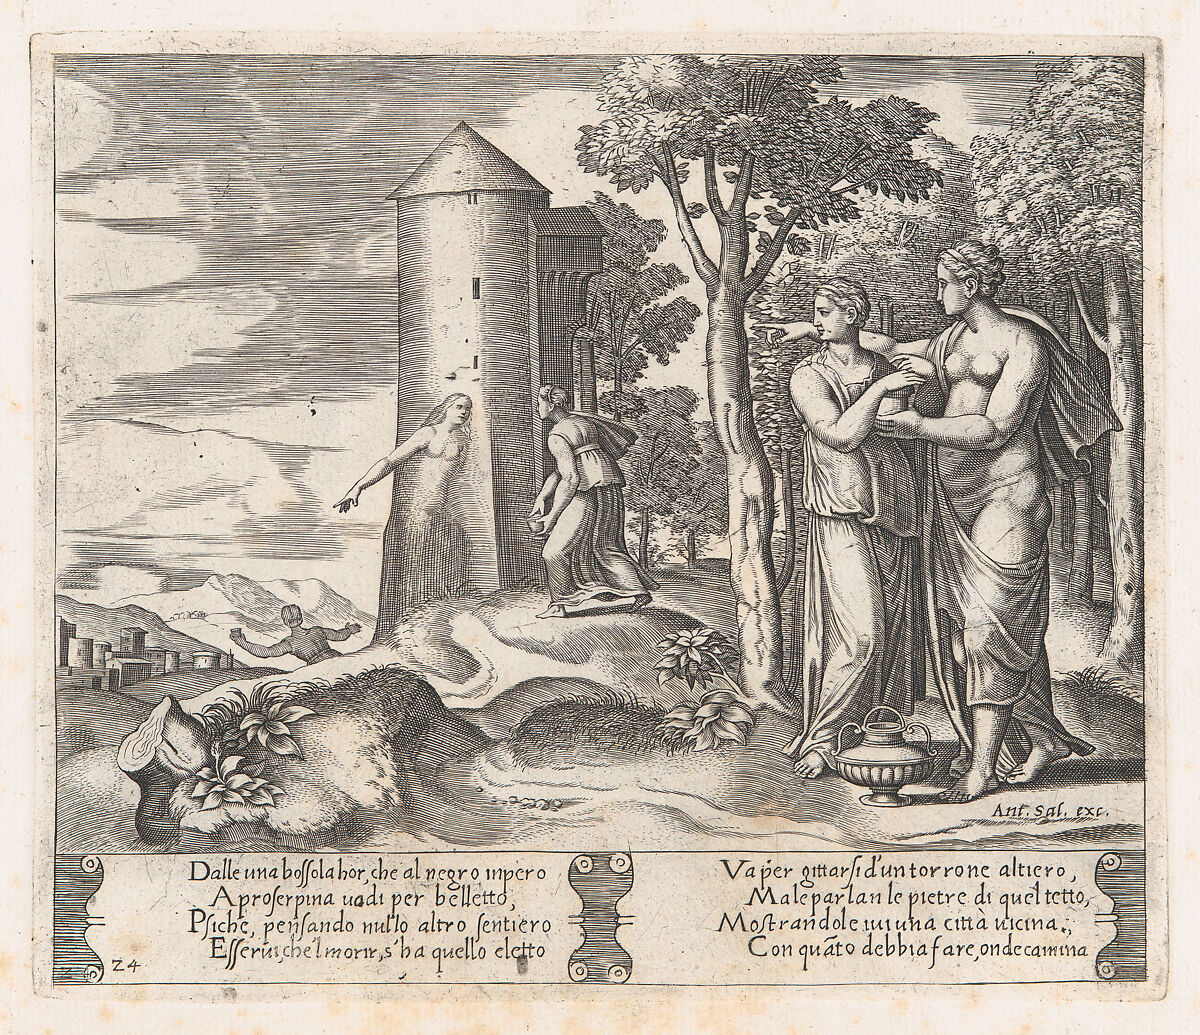 Plate 24: Venus and Psyche standing at right, pointing to the underworld at center, into which Psyche enters, from "The Story of Cupid and Psyche as told by Apuleius", Master of the Die (Italian, active Rome, ca. 1530–60), Engraving 